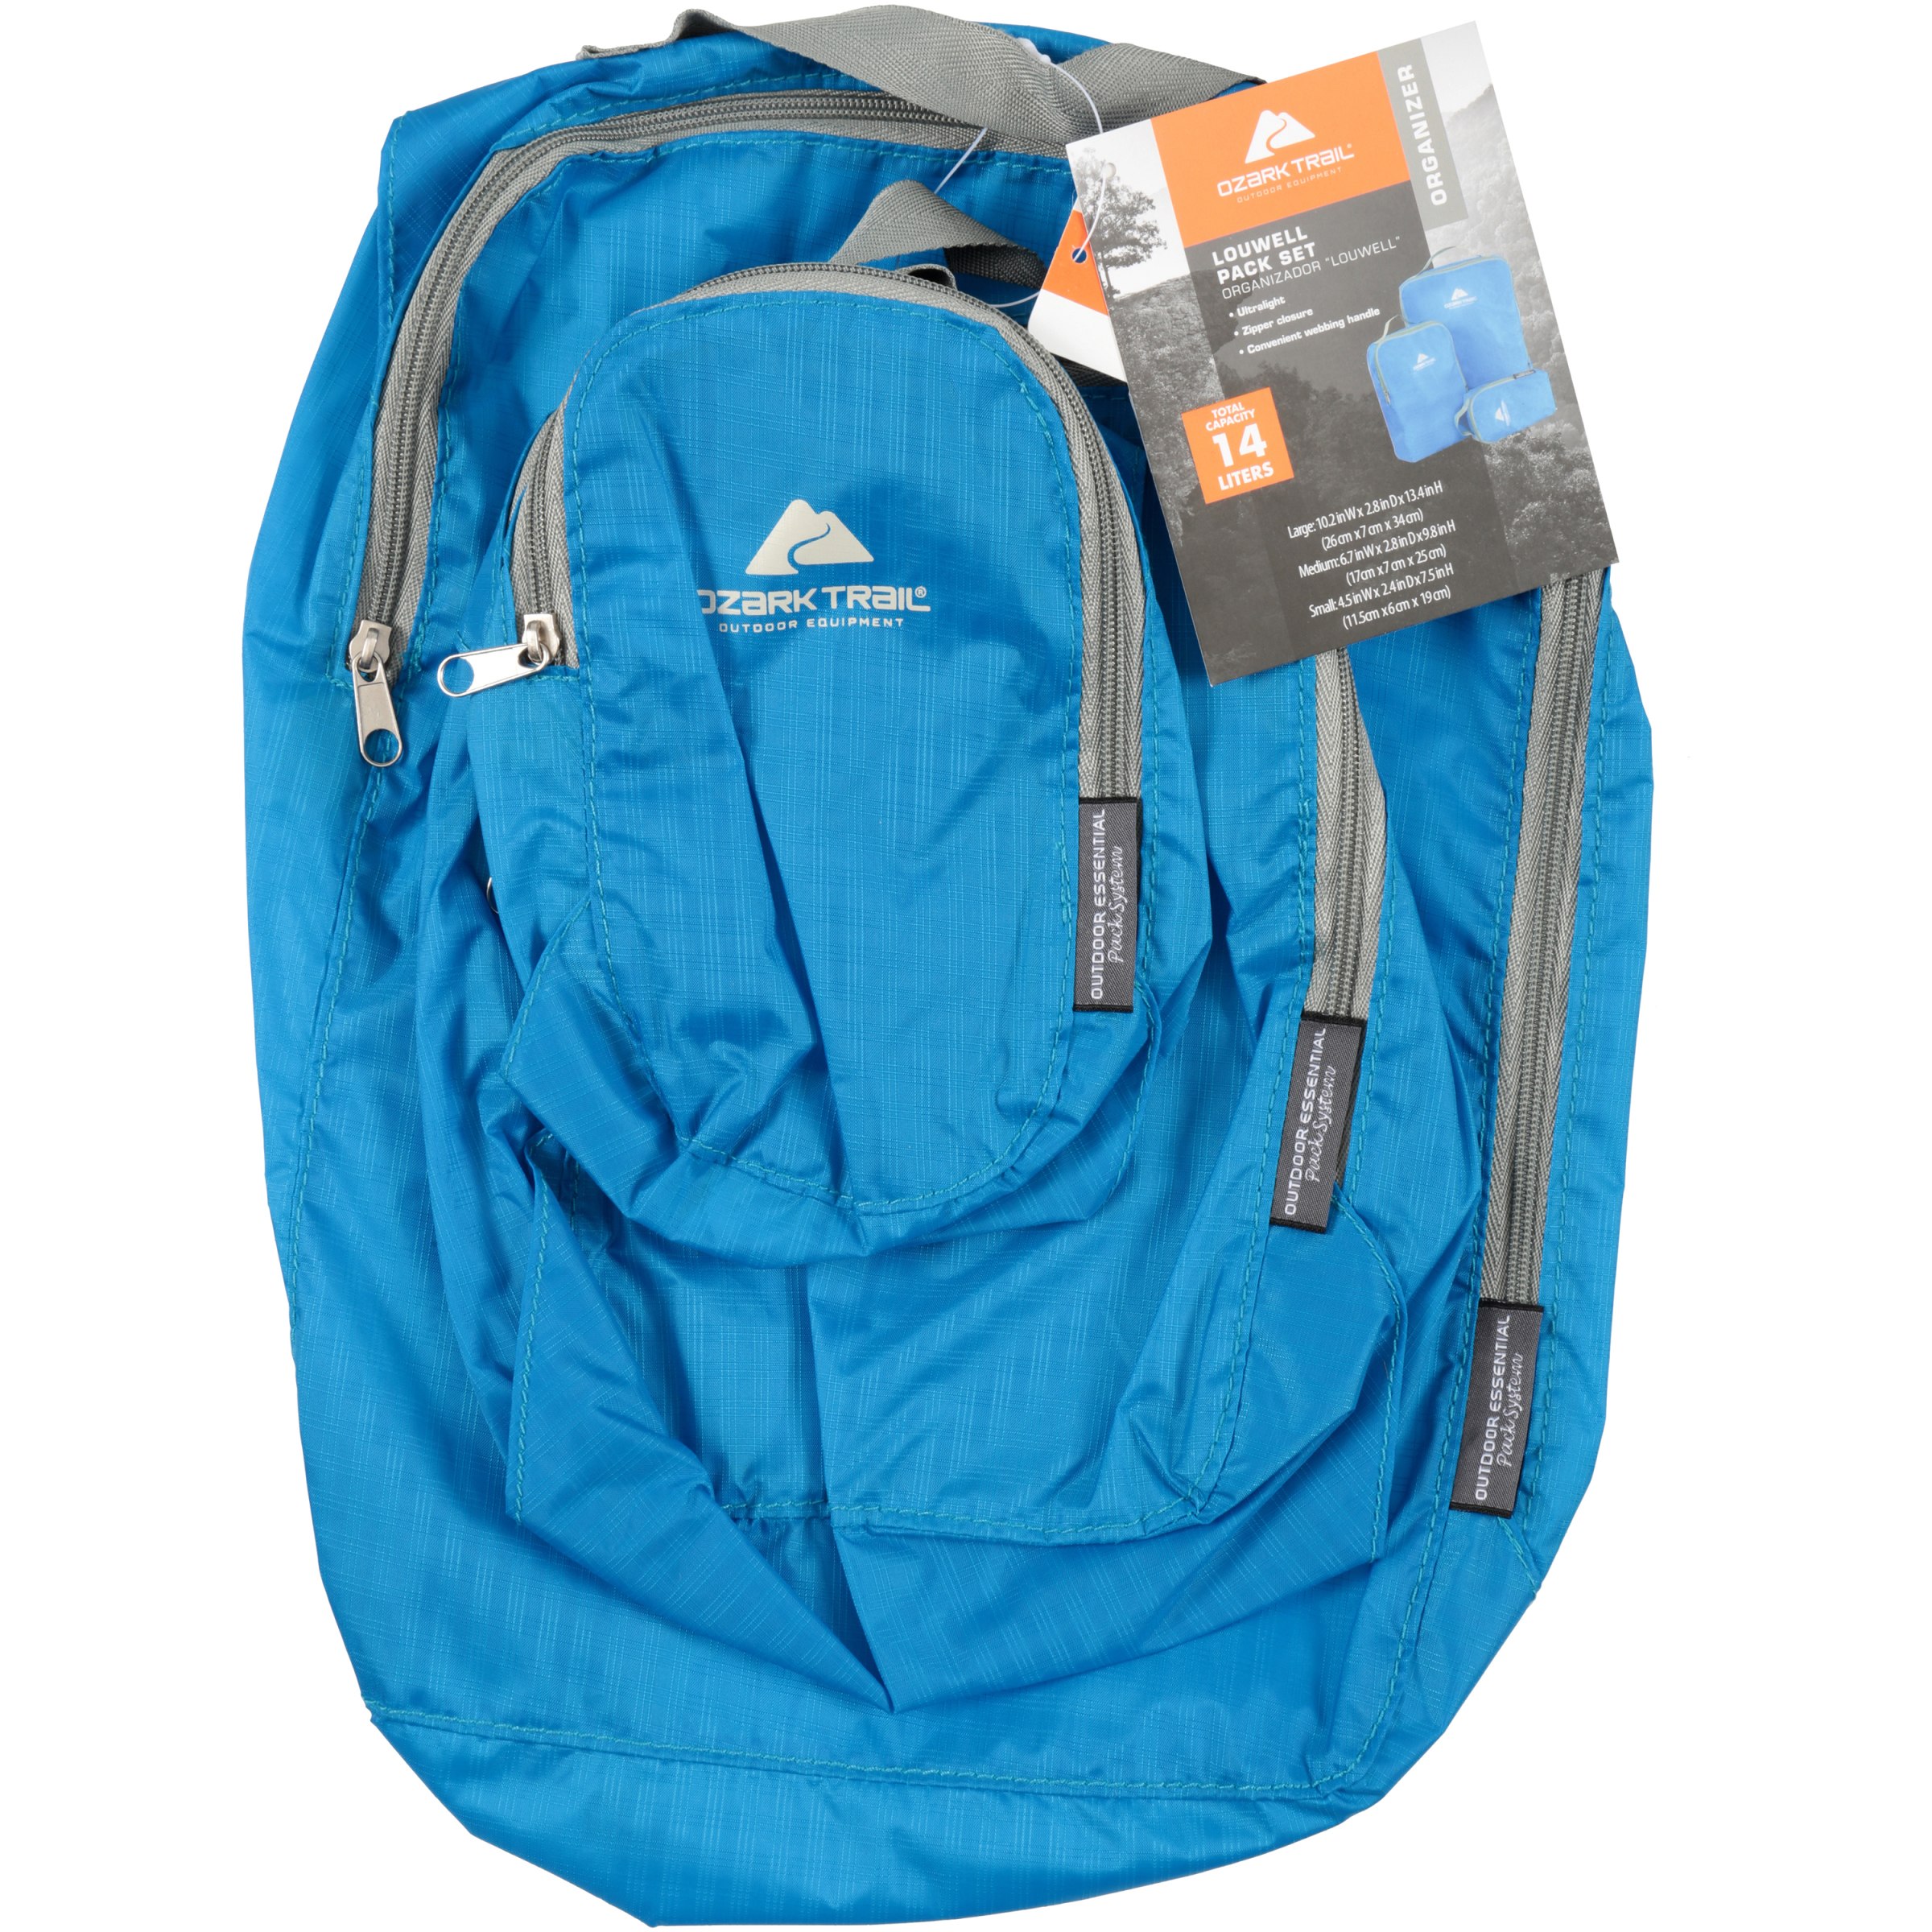 Ozark Trail Packing Cubes, 3pc Set - image 2 of 3